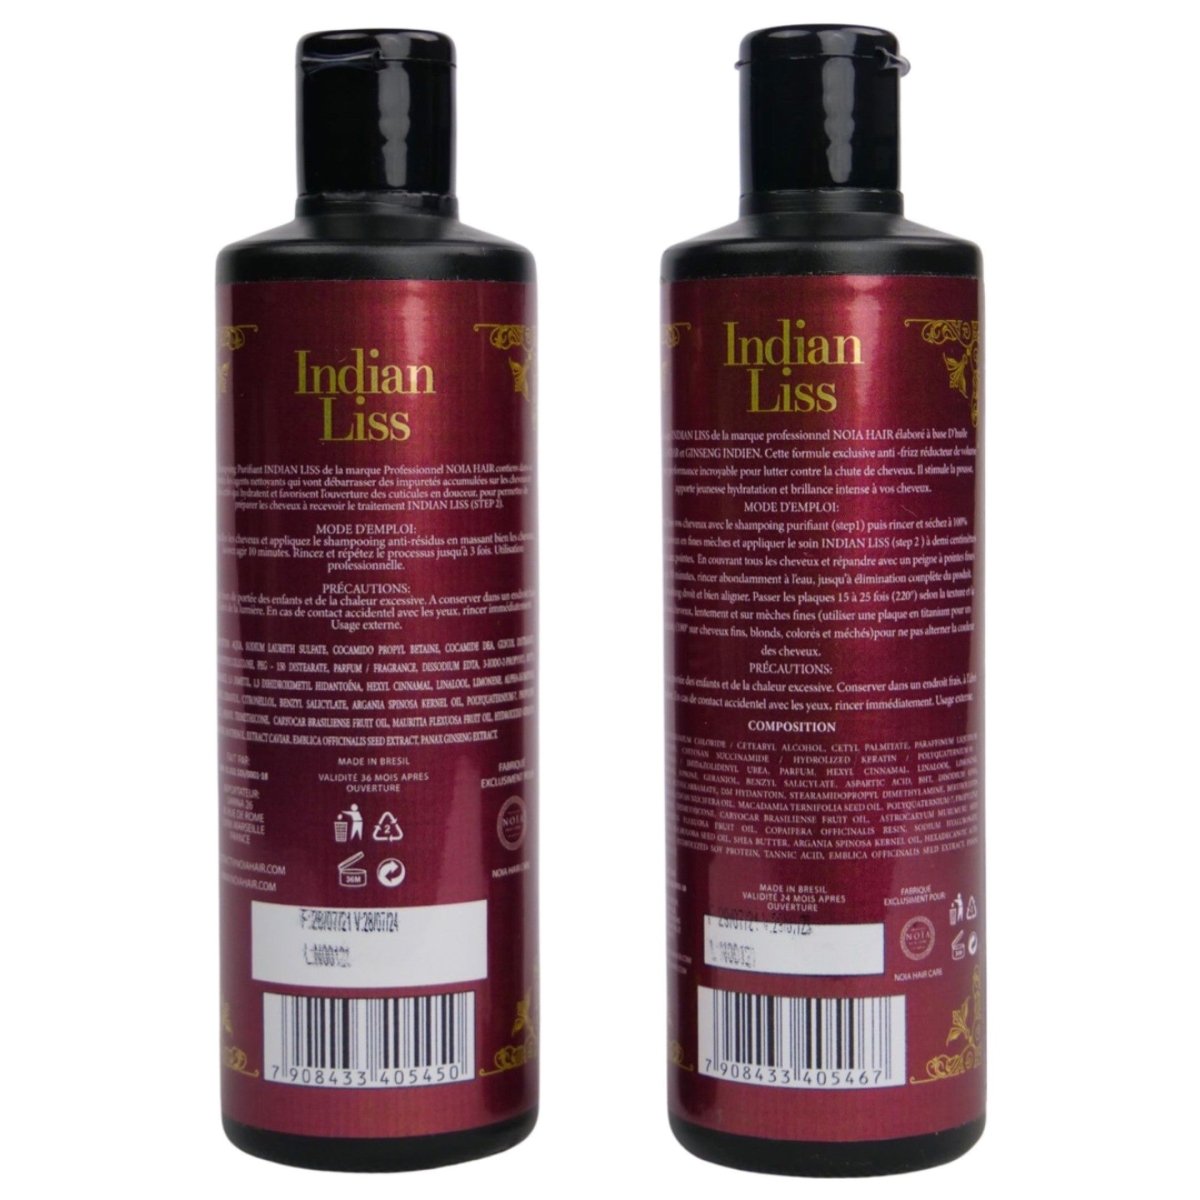 LISSAGE NOIA HAIR - INDIAN LISS -HUILE D'AMLA .CAVIAR & GINSENG INDIEN - PROTEIN GOLD - 2 X200ML - BEAUTEPRICE LISSAGE NOIA HAIR - INDIAN LISS -HUILE D'AMLA .CAVIAR & GINSENG INDIEN - PROTEIN GOLD - 2 X200ML NOÏA HAIR BEAUTEPRICE